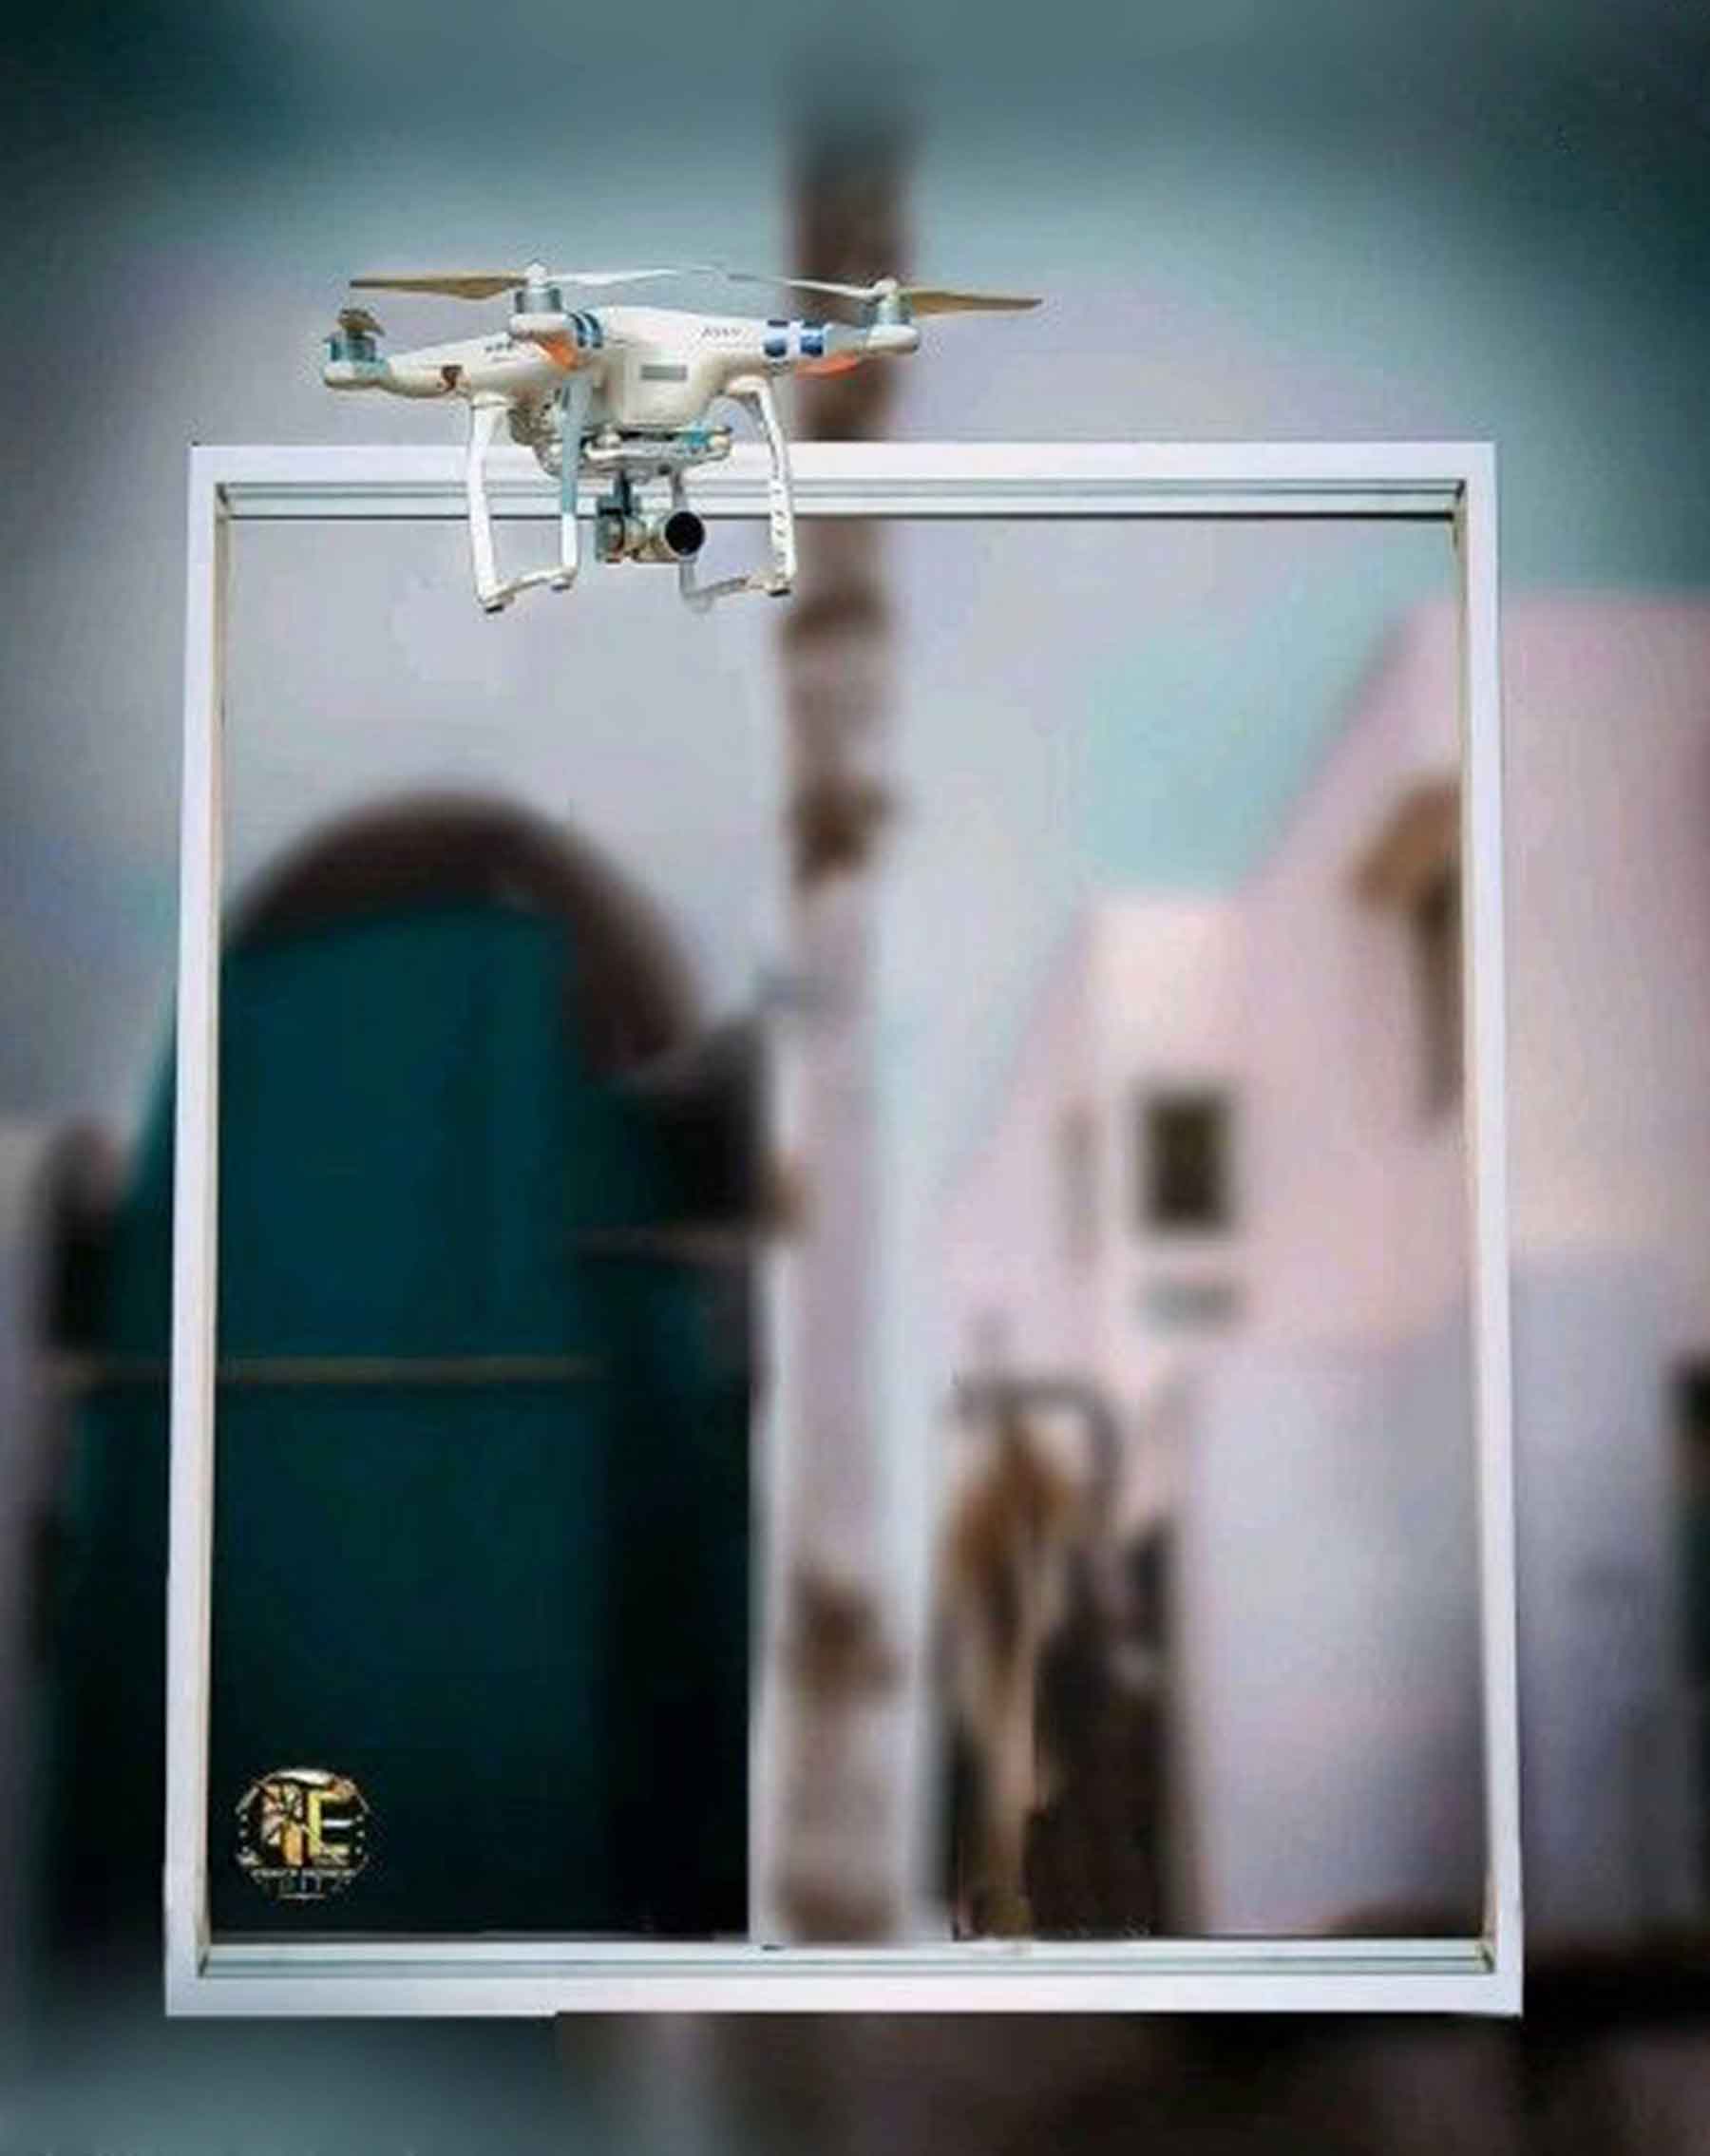 Photo Frame With Drone Free Stock Image [ Download ]